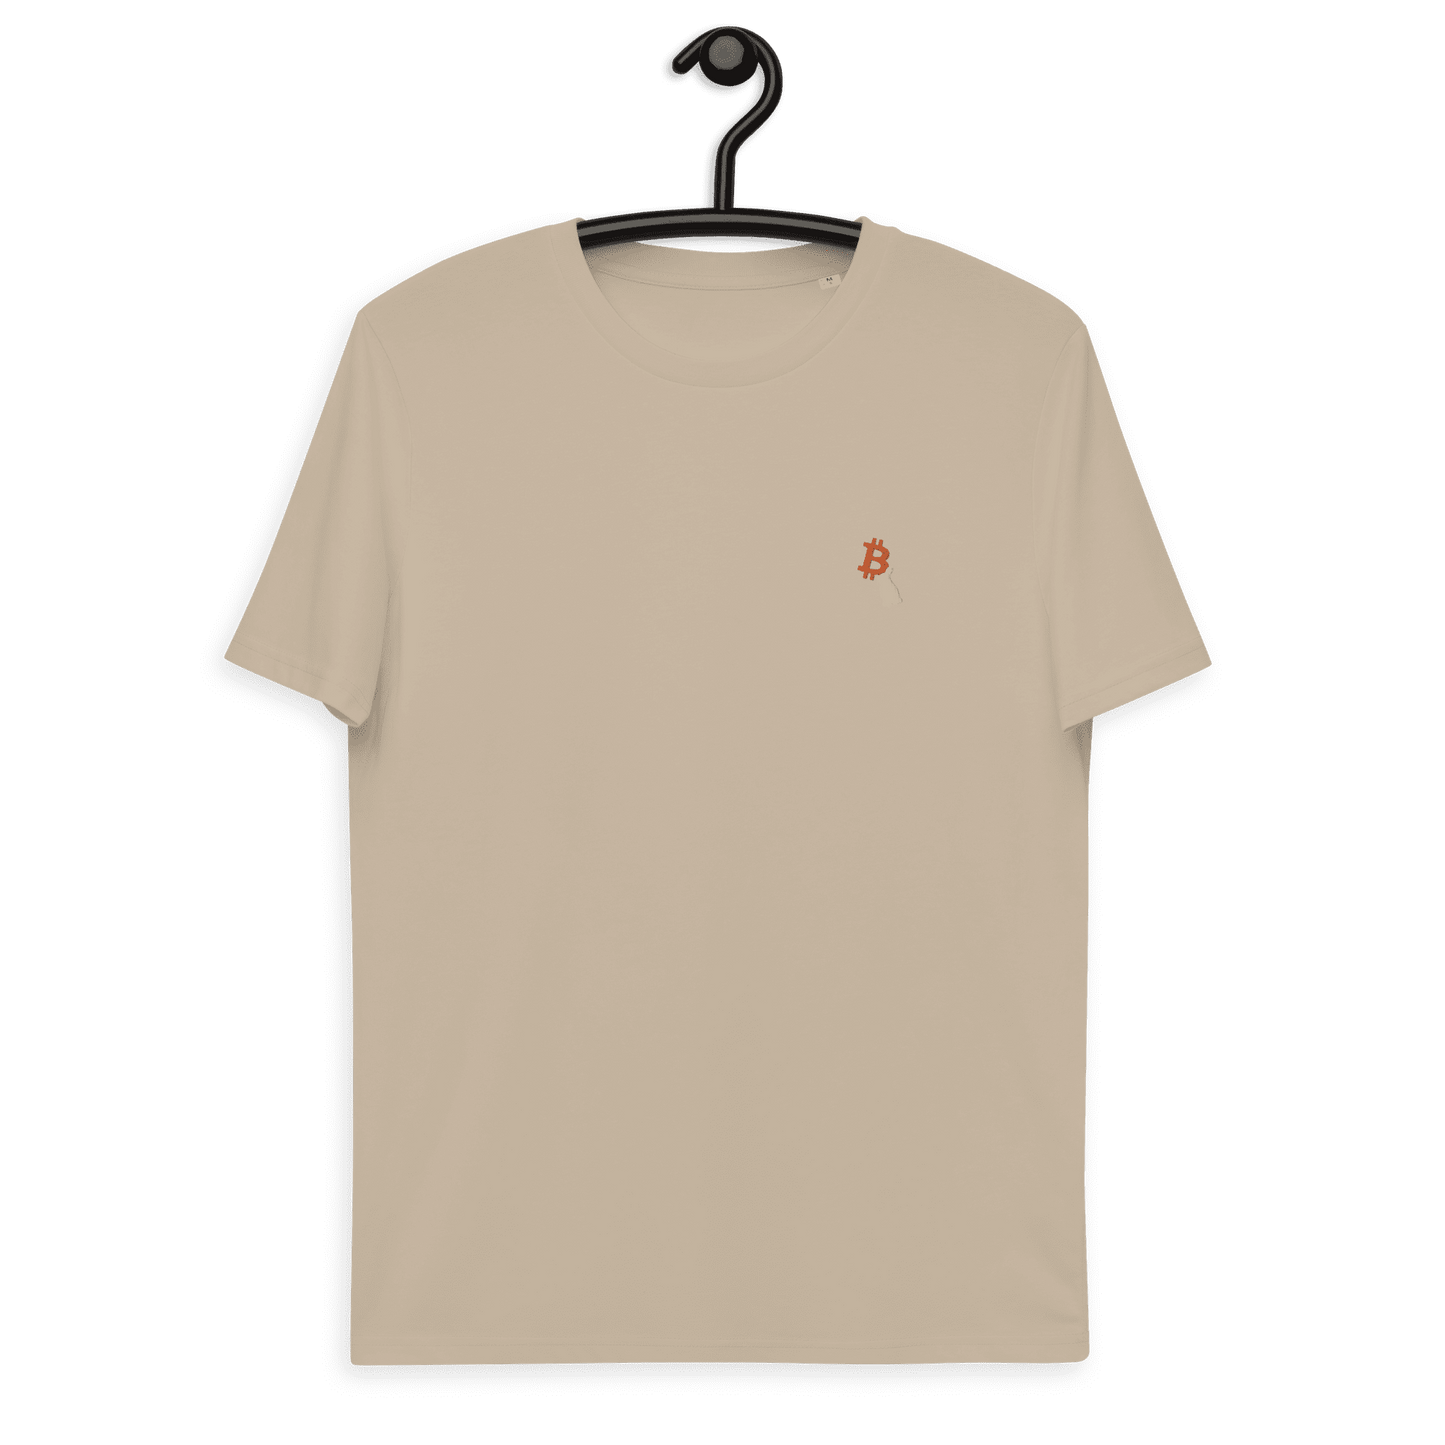 Front view of a desert dust colored embroidered bitcoin t-shirt.